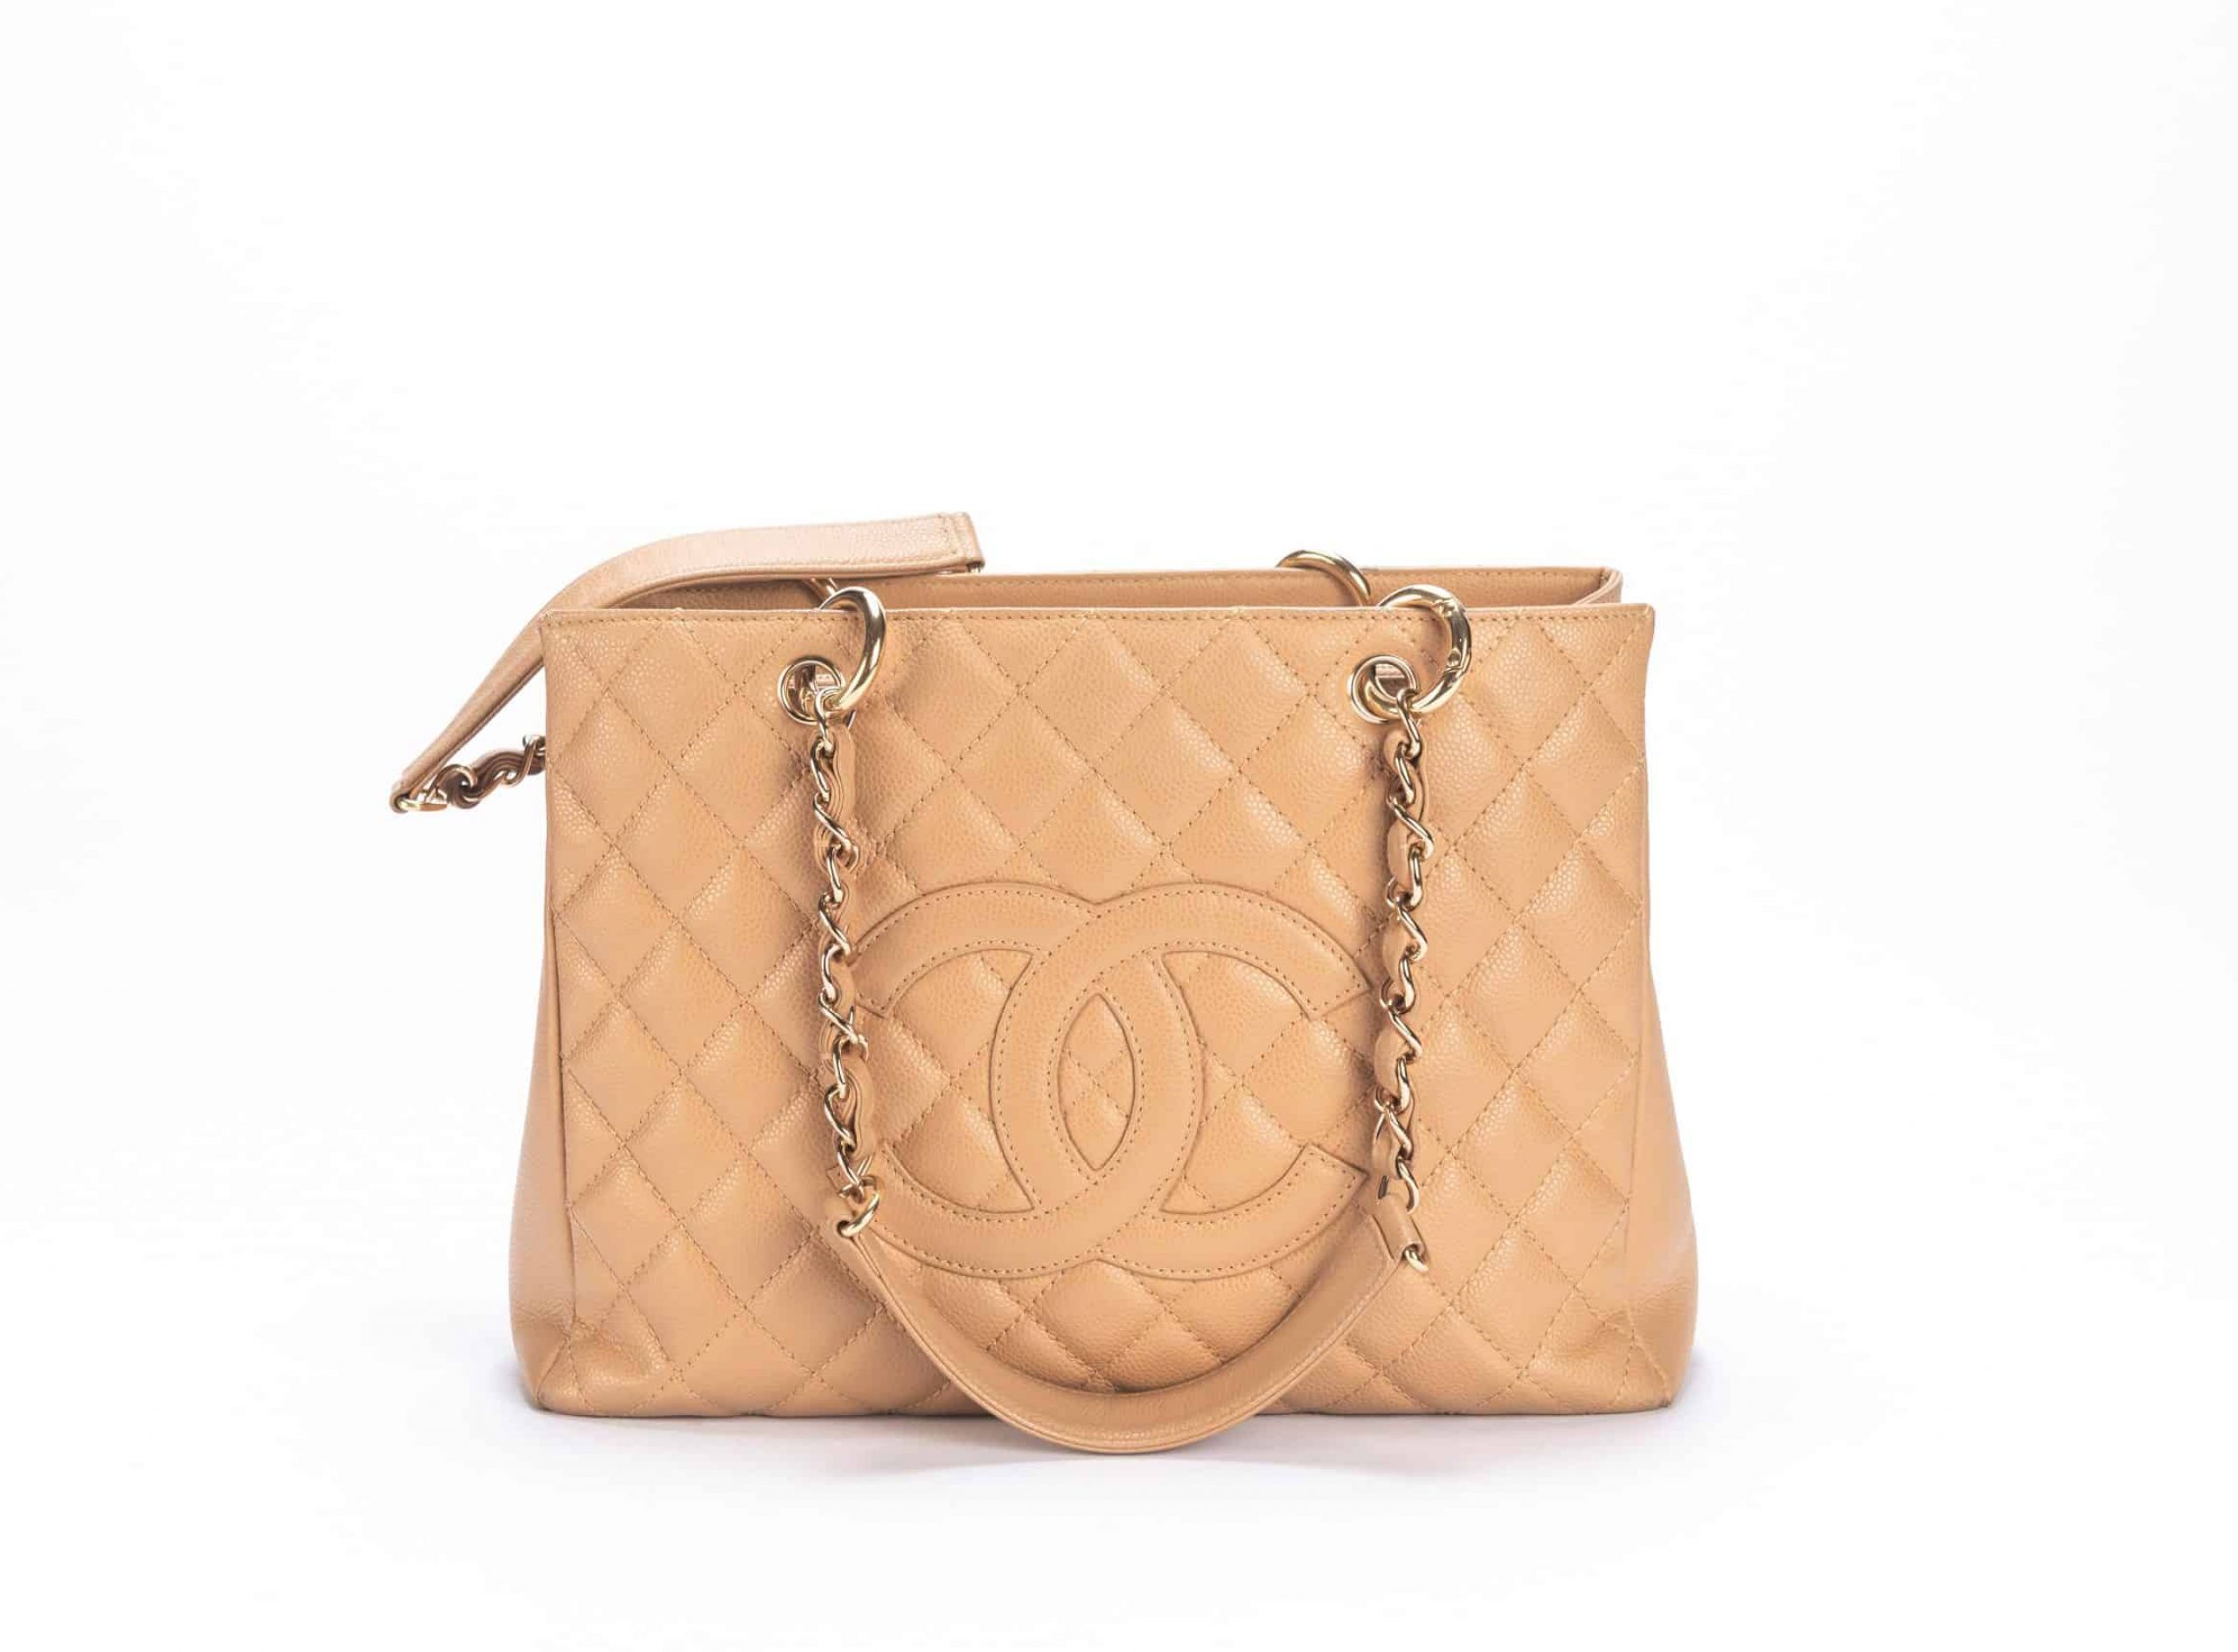 Chanel GST Caviar Quilted Bag in Beige with Gold Hardware (1)